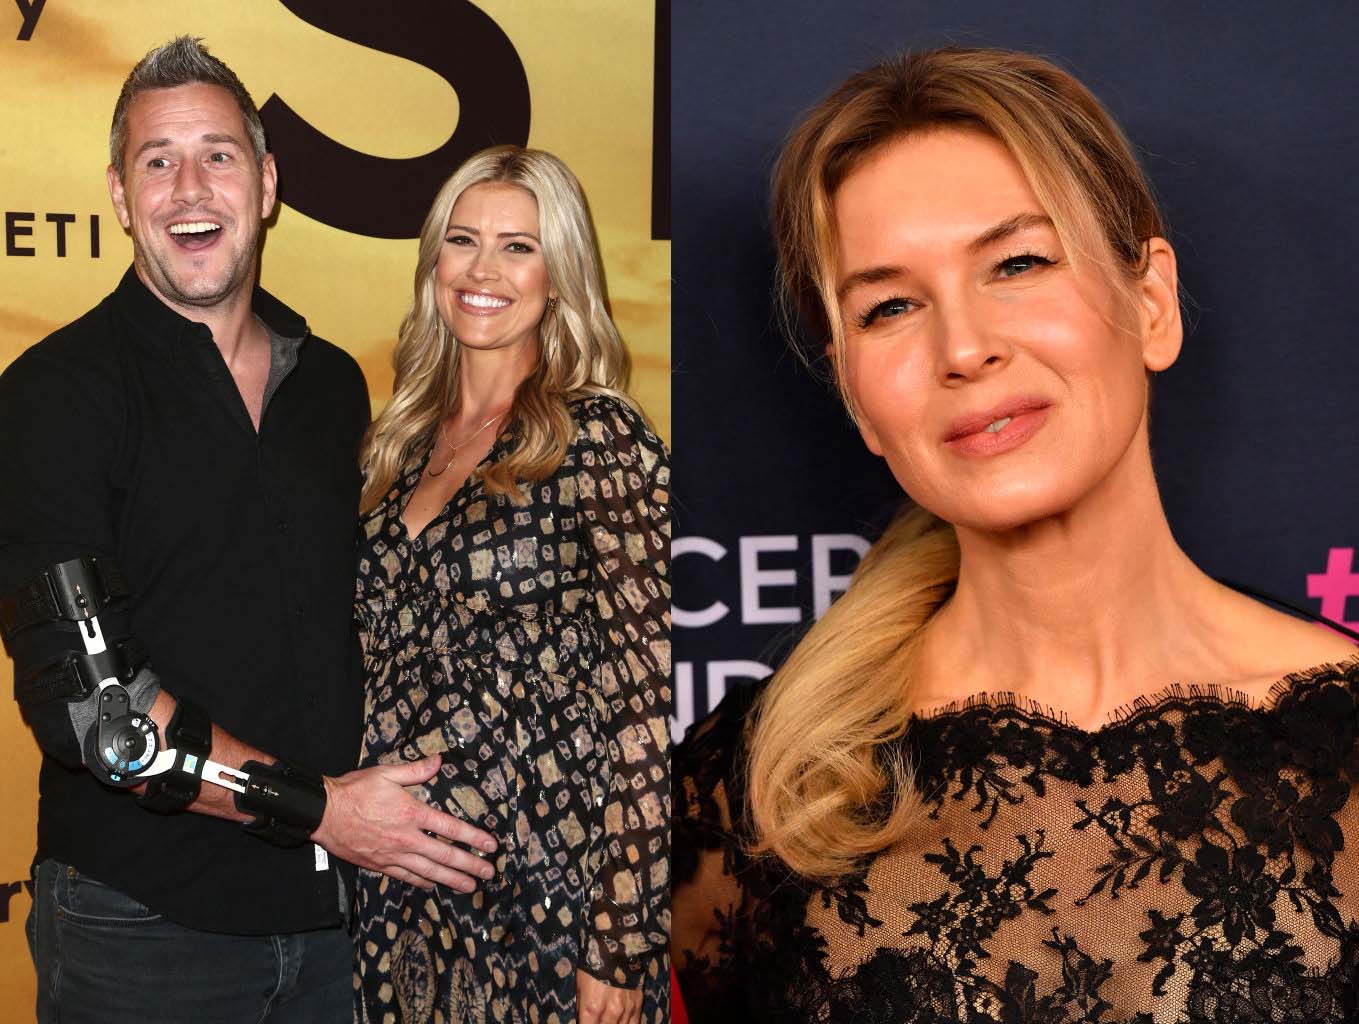 Did Ant Anstead Cheat on Christina Haack with New Girlfriend Renée Zellweger?